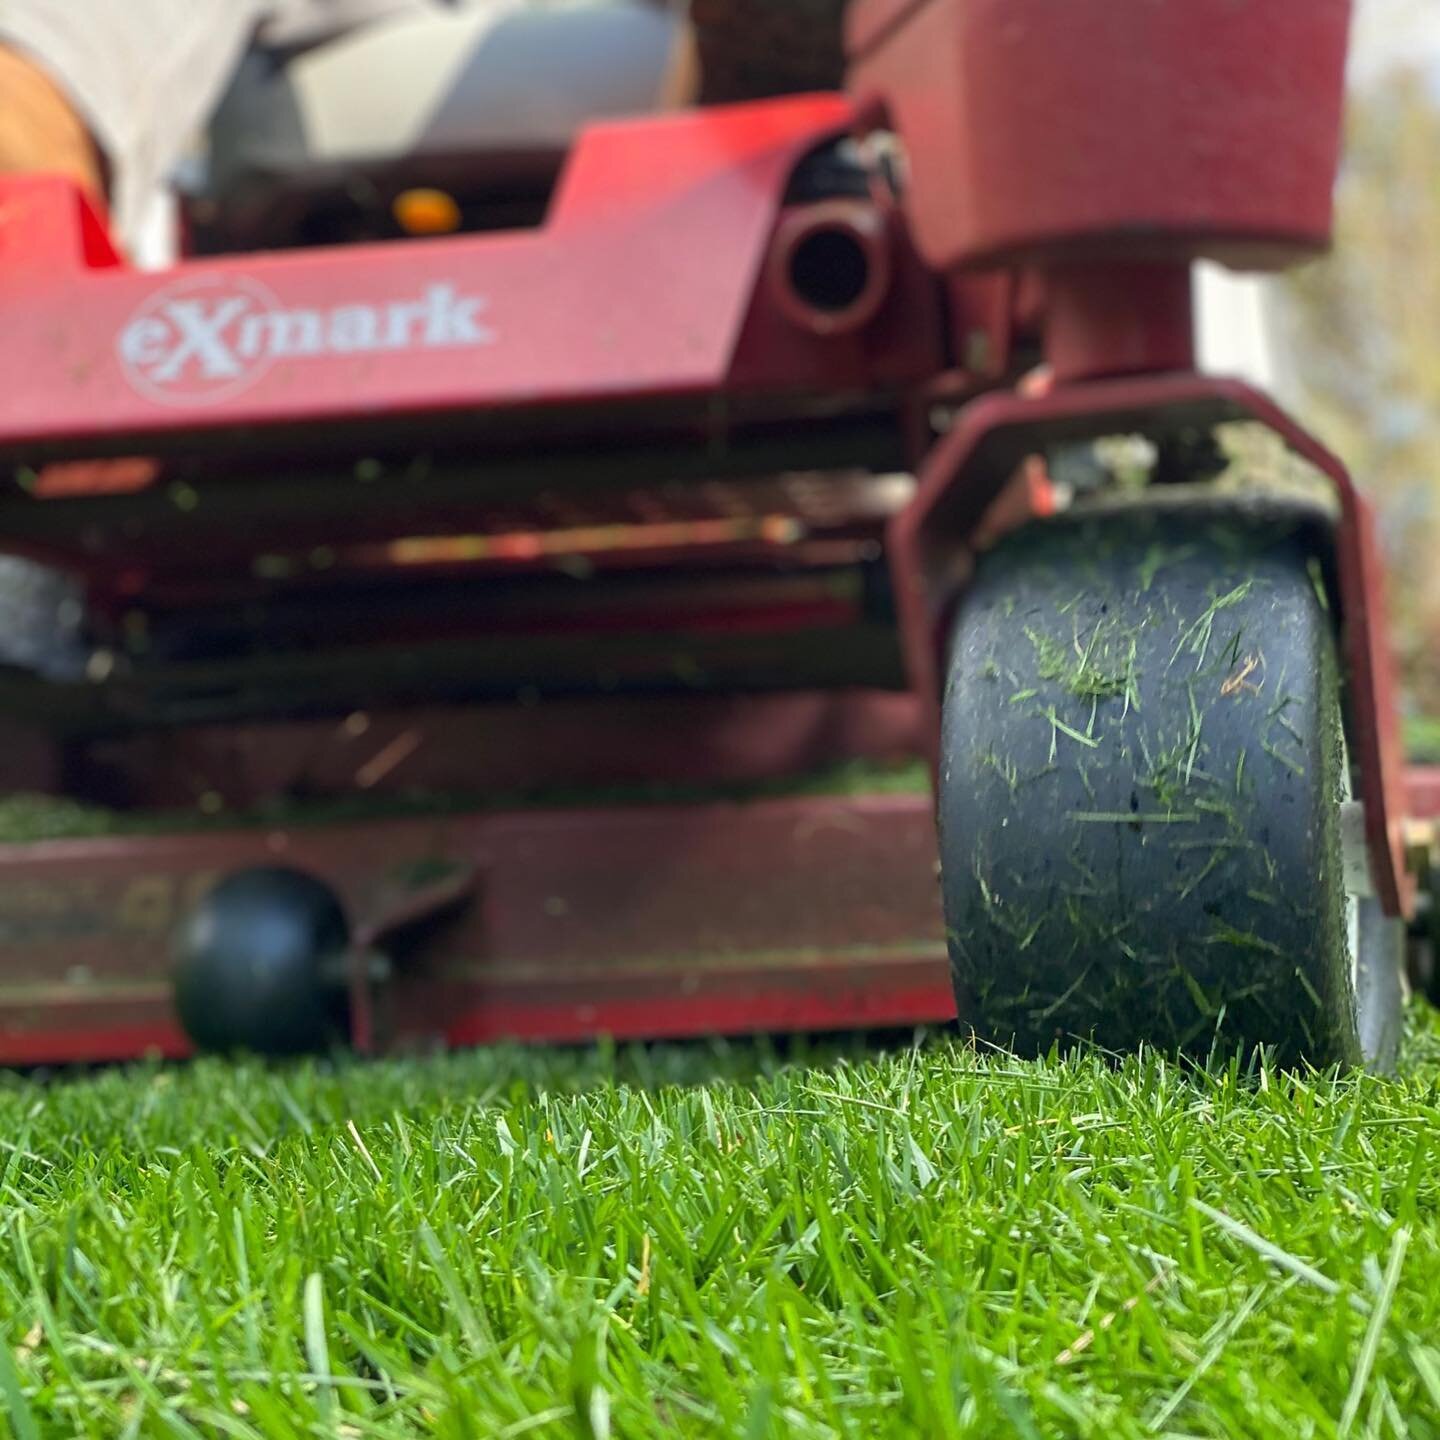 TURF MANAGEMENT:

Using professional equipment that is well serviced leaves a clean cut on the grass which promotes healthy growth!  Having the right equipment is key. @exmarkmowers is the equipment of choice for Five Forks Lawn Care